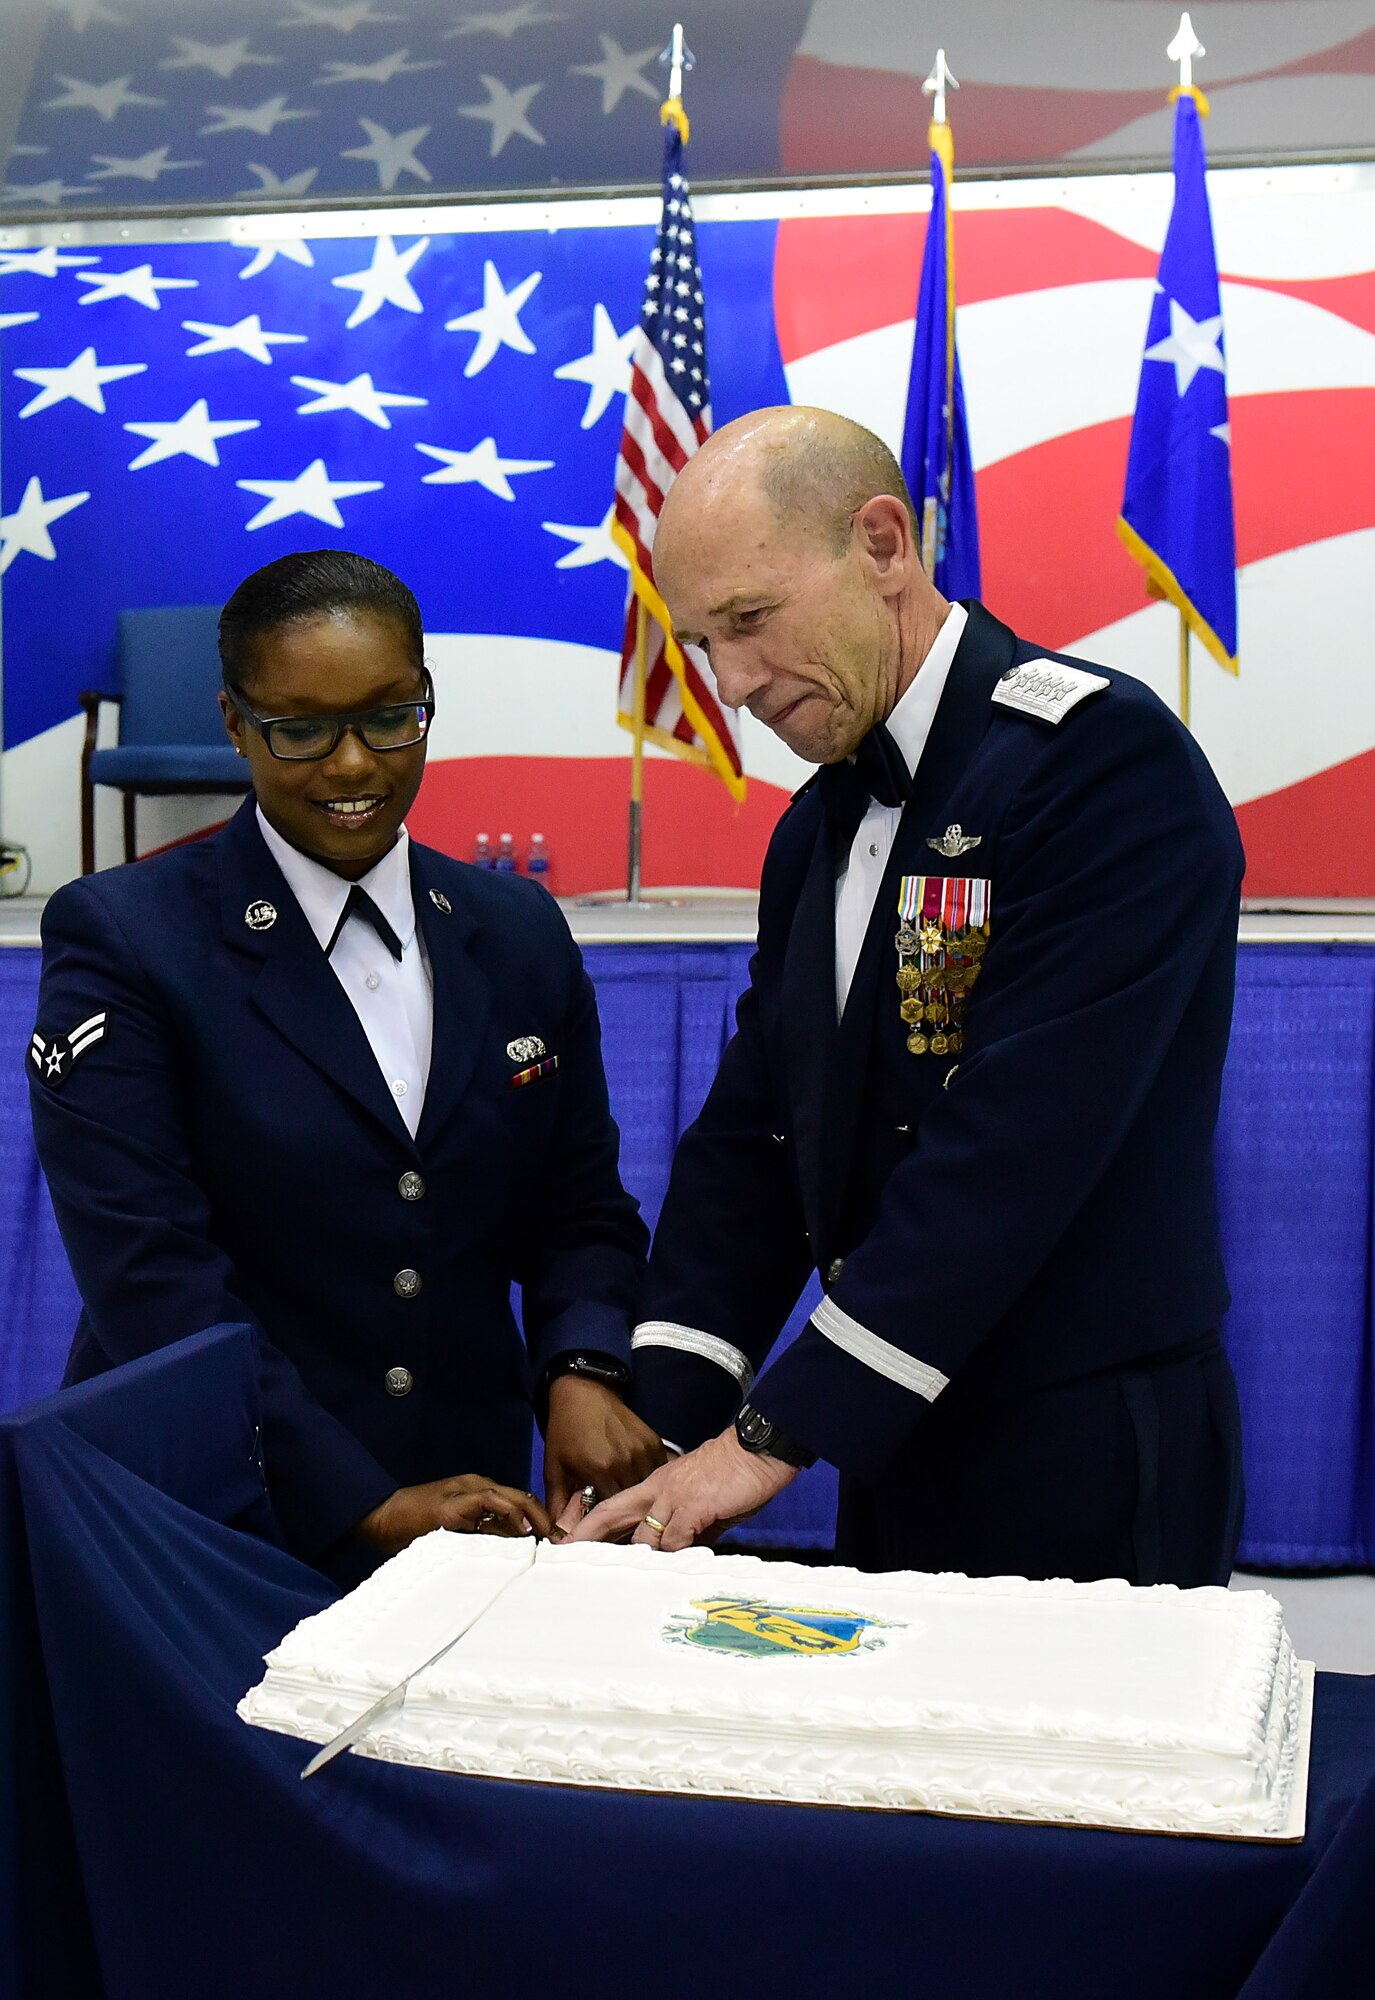 Gen. Mike Holmes, right, commander of Air Combat Command, and Airman 1st Class Deja Adams, left, 4th Logistics Readiness Squadron flight service center apprentice, cut a cake during the the 4th Fighter Wing 75th Anniversary Gala, Sept. 16, 2017, at Seymour Johnson Air Force Base, North Carolina. The cake cutting tradition calls for the oldest and youngest Airman present to use a saber to cut the cake together. (U.S. Air Force photo by Airman 1st Class Victoria Boyton)